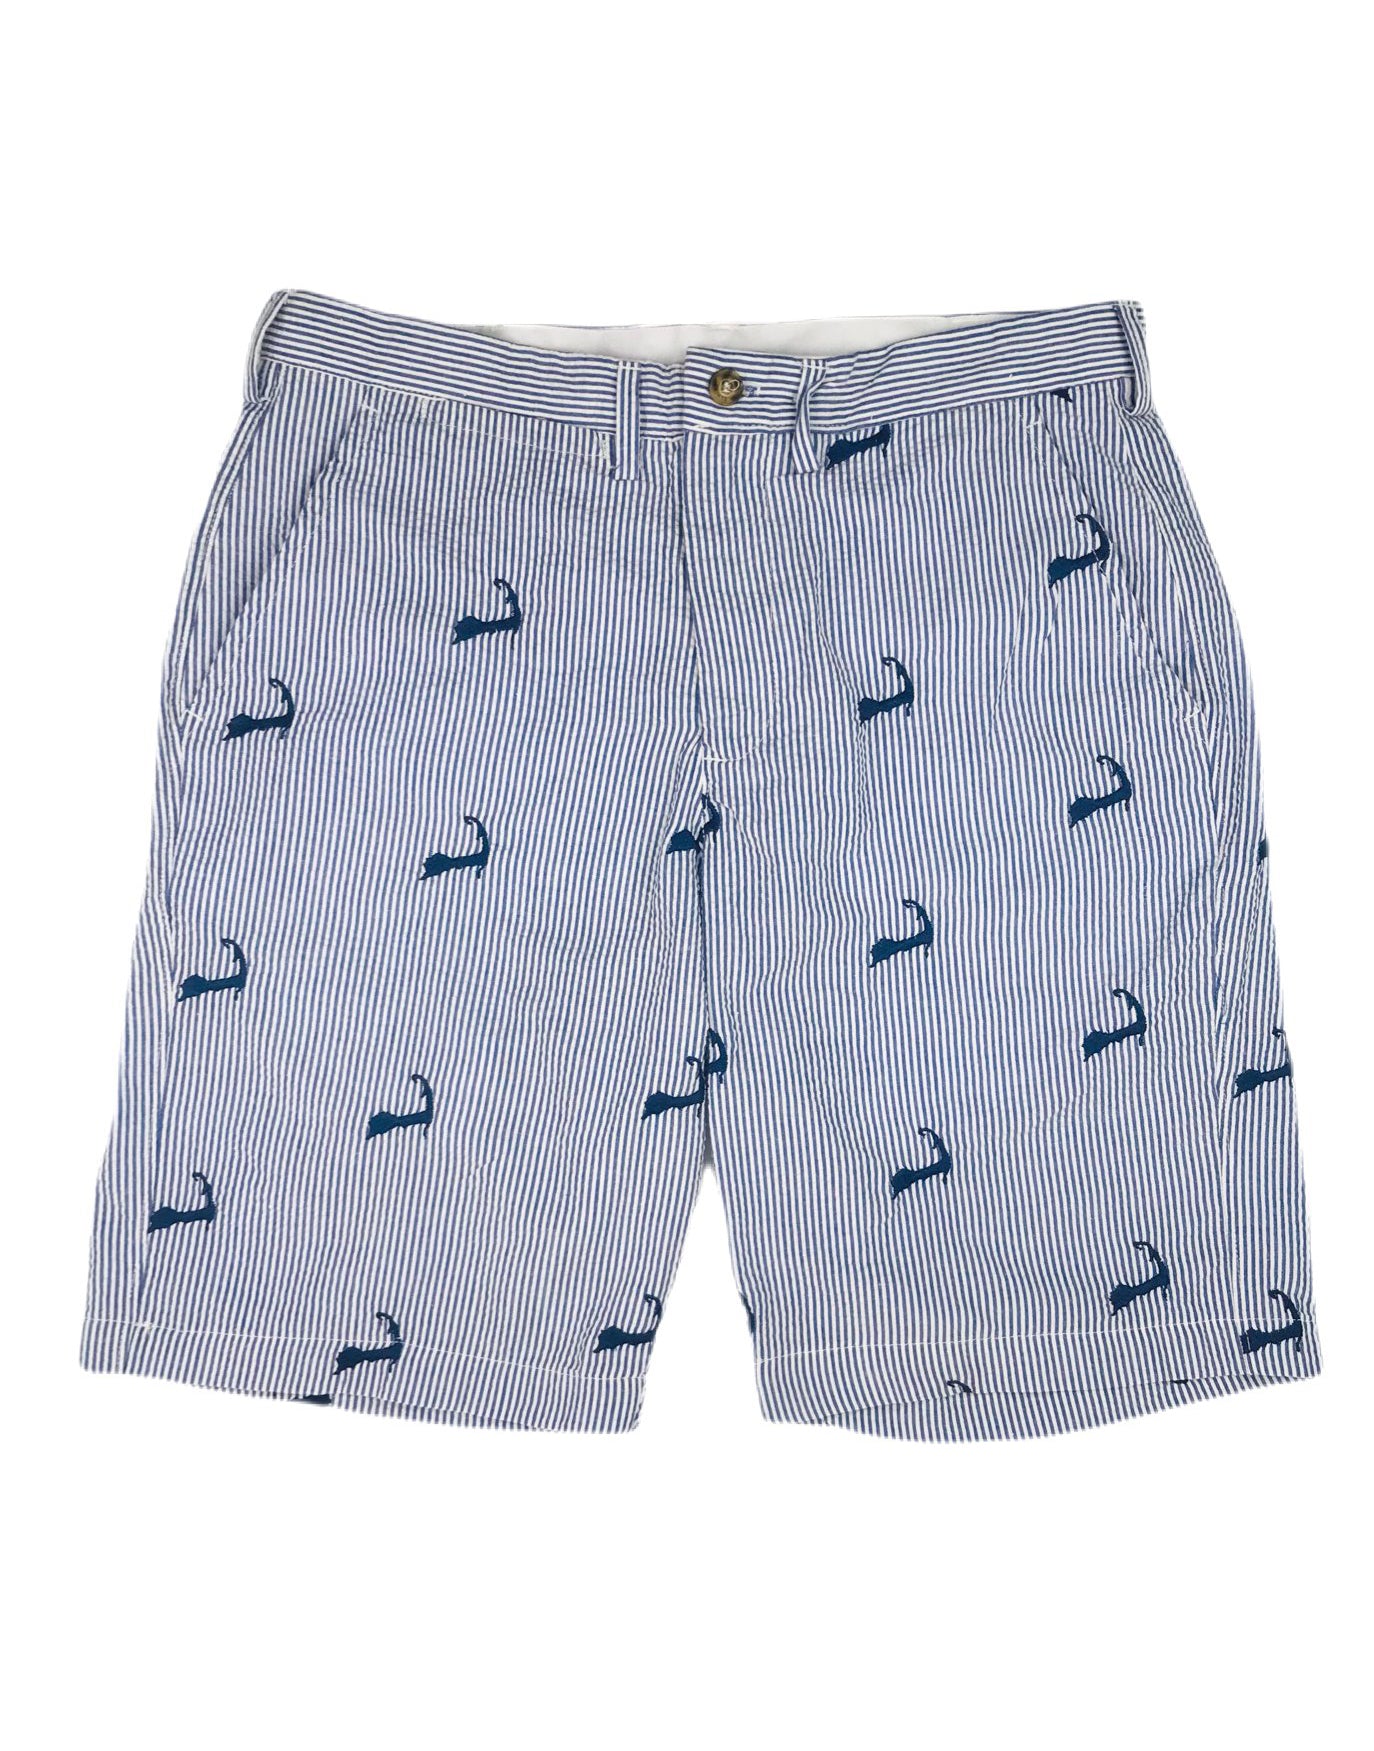 Blue Mens Embroidered Seersucker Shorts with Navy Embroidered Cape Cods